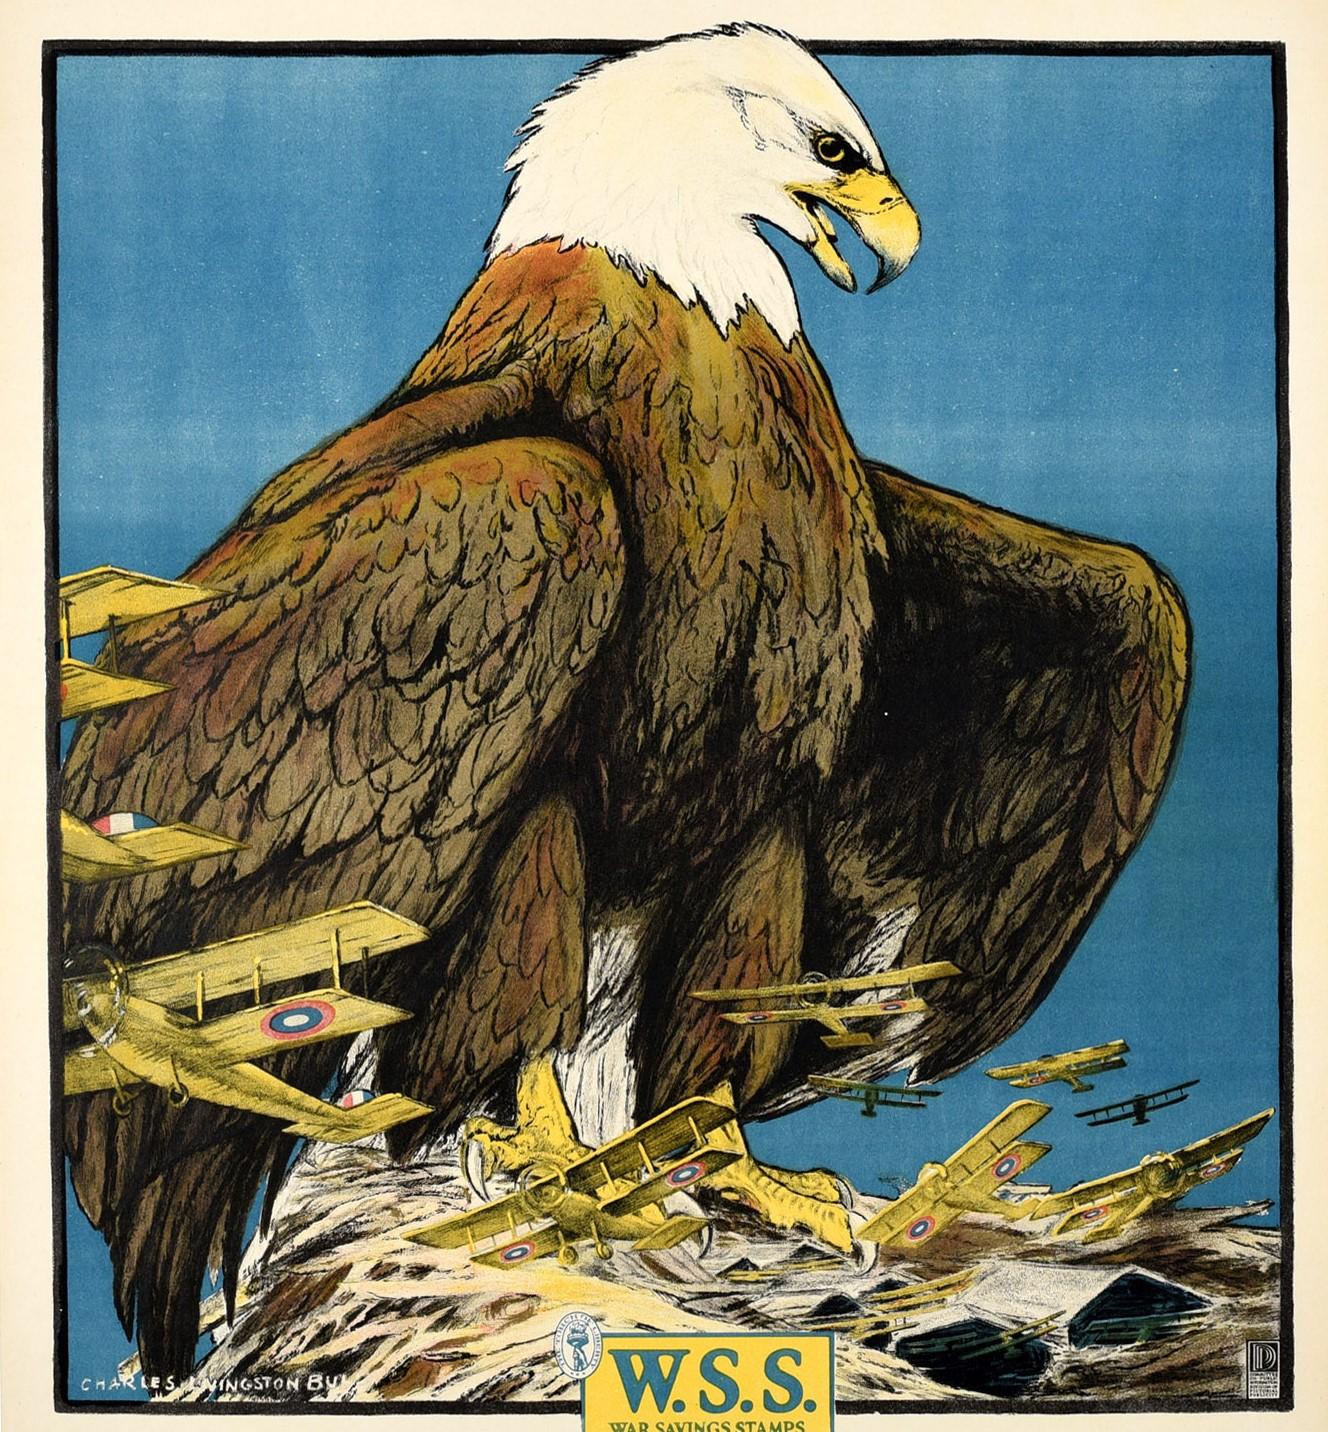 Original antique World War One poster in support of the Home Front War Effort - Keep Him Free Buy War Savings Stamps issued by the United States Treasury Dept. - featuring dynamic artwork by the American artist known for his wildlife illustrations